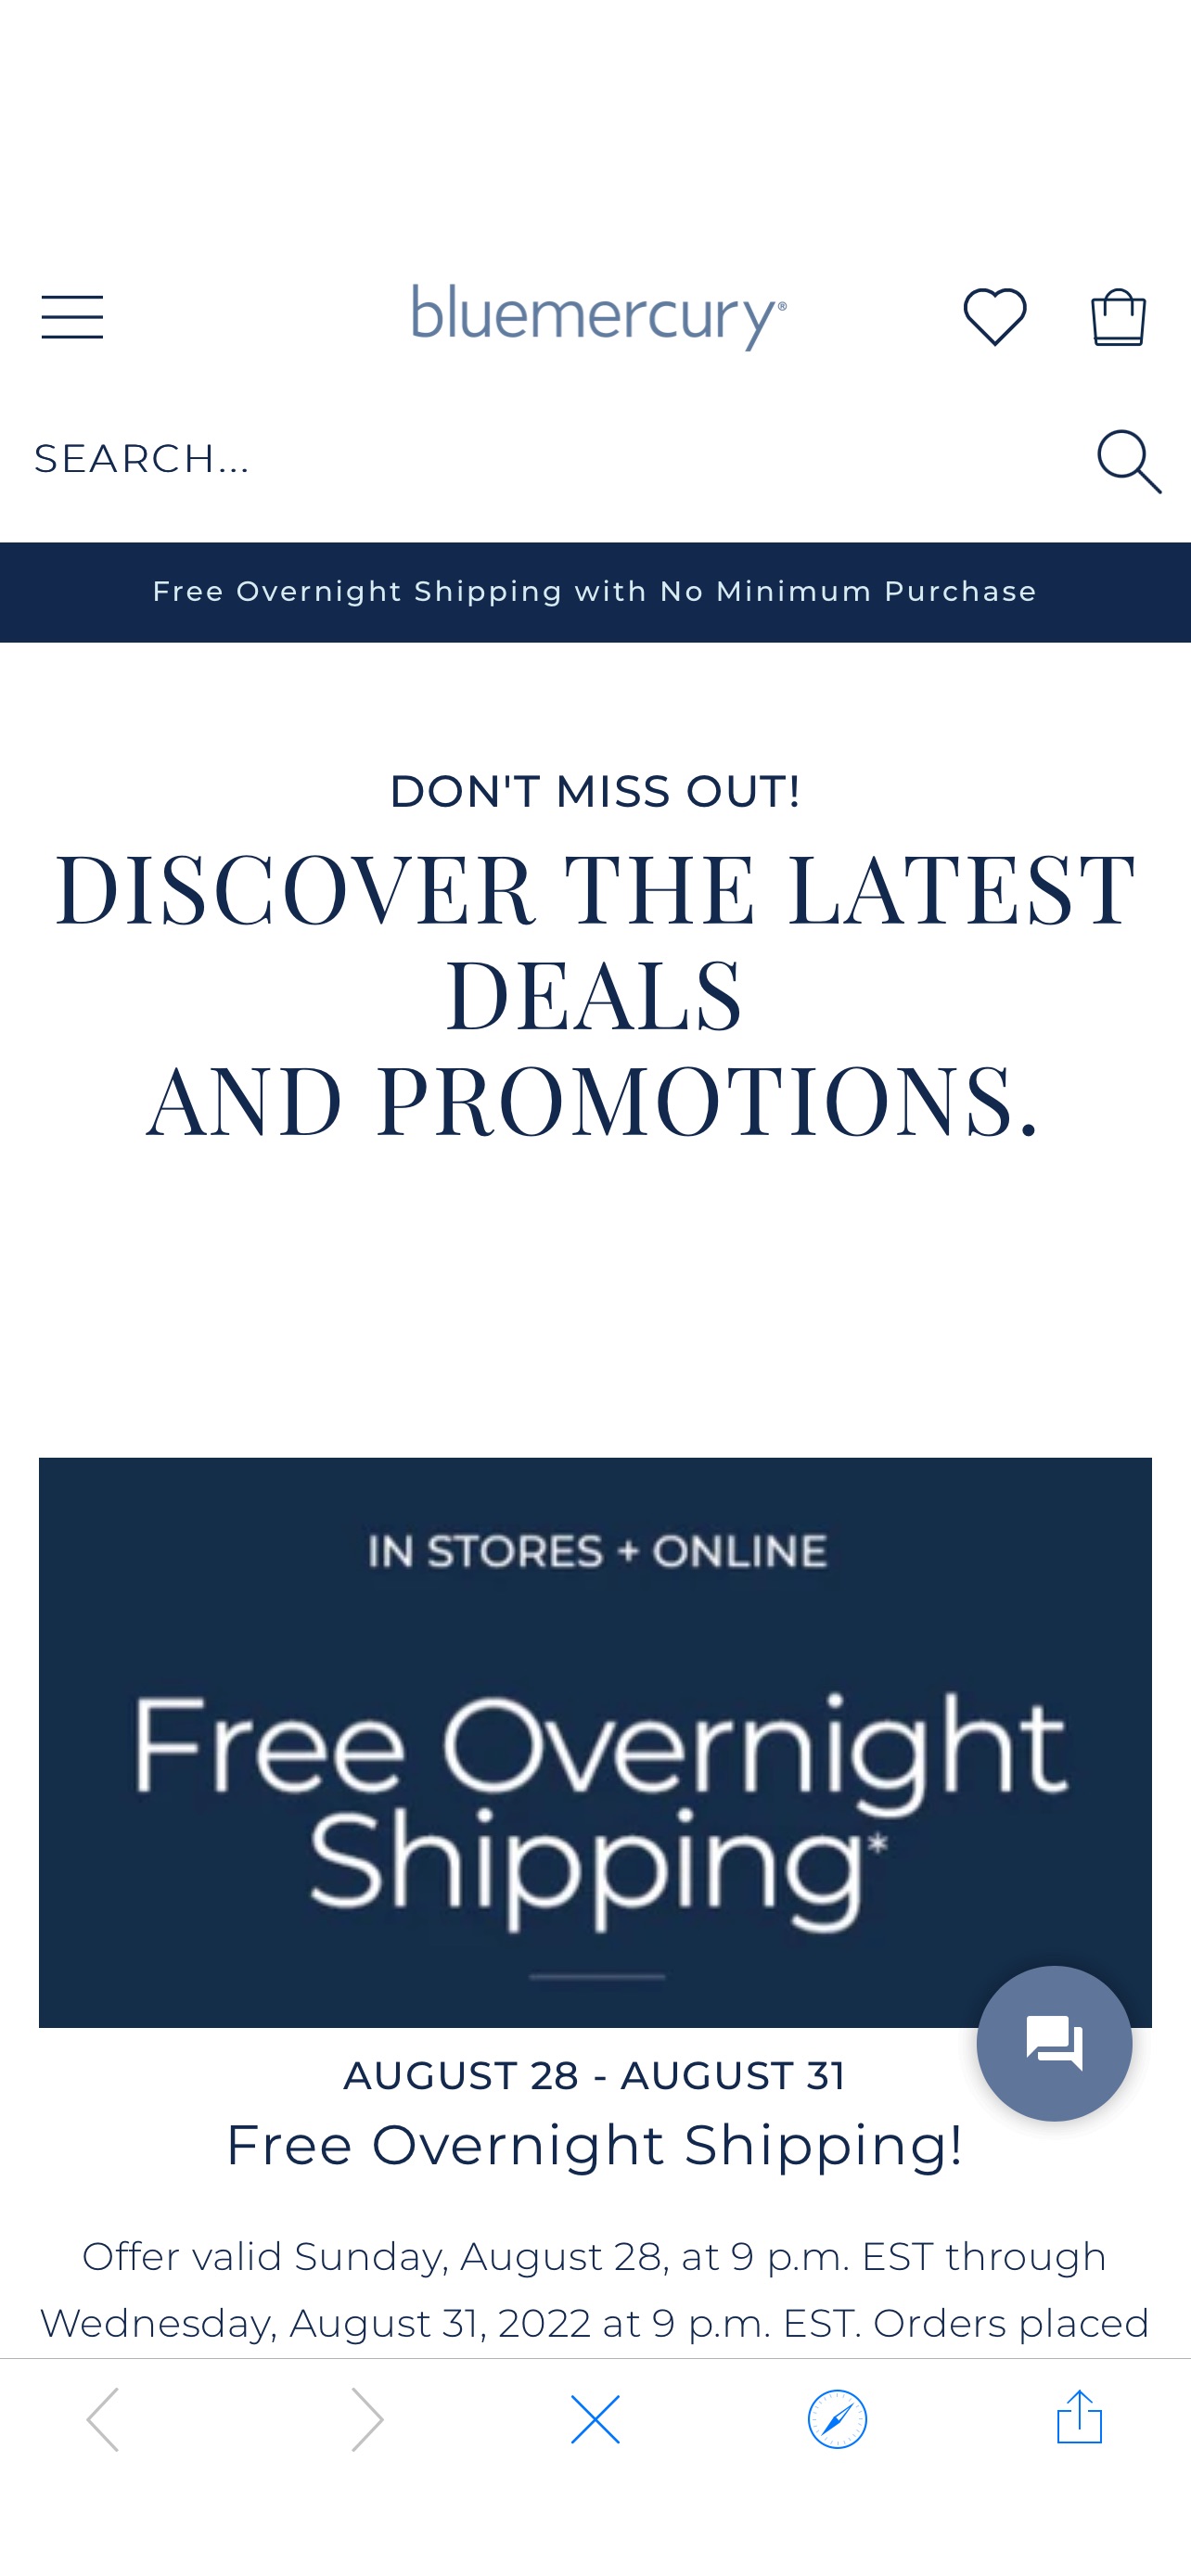 Bluemercury Online + In Store Free Overnight Shipping - Aug 28, 9PM EST to Aug 31, 9PM EST